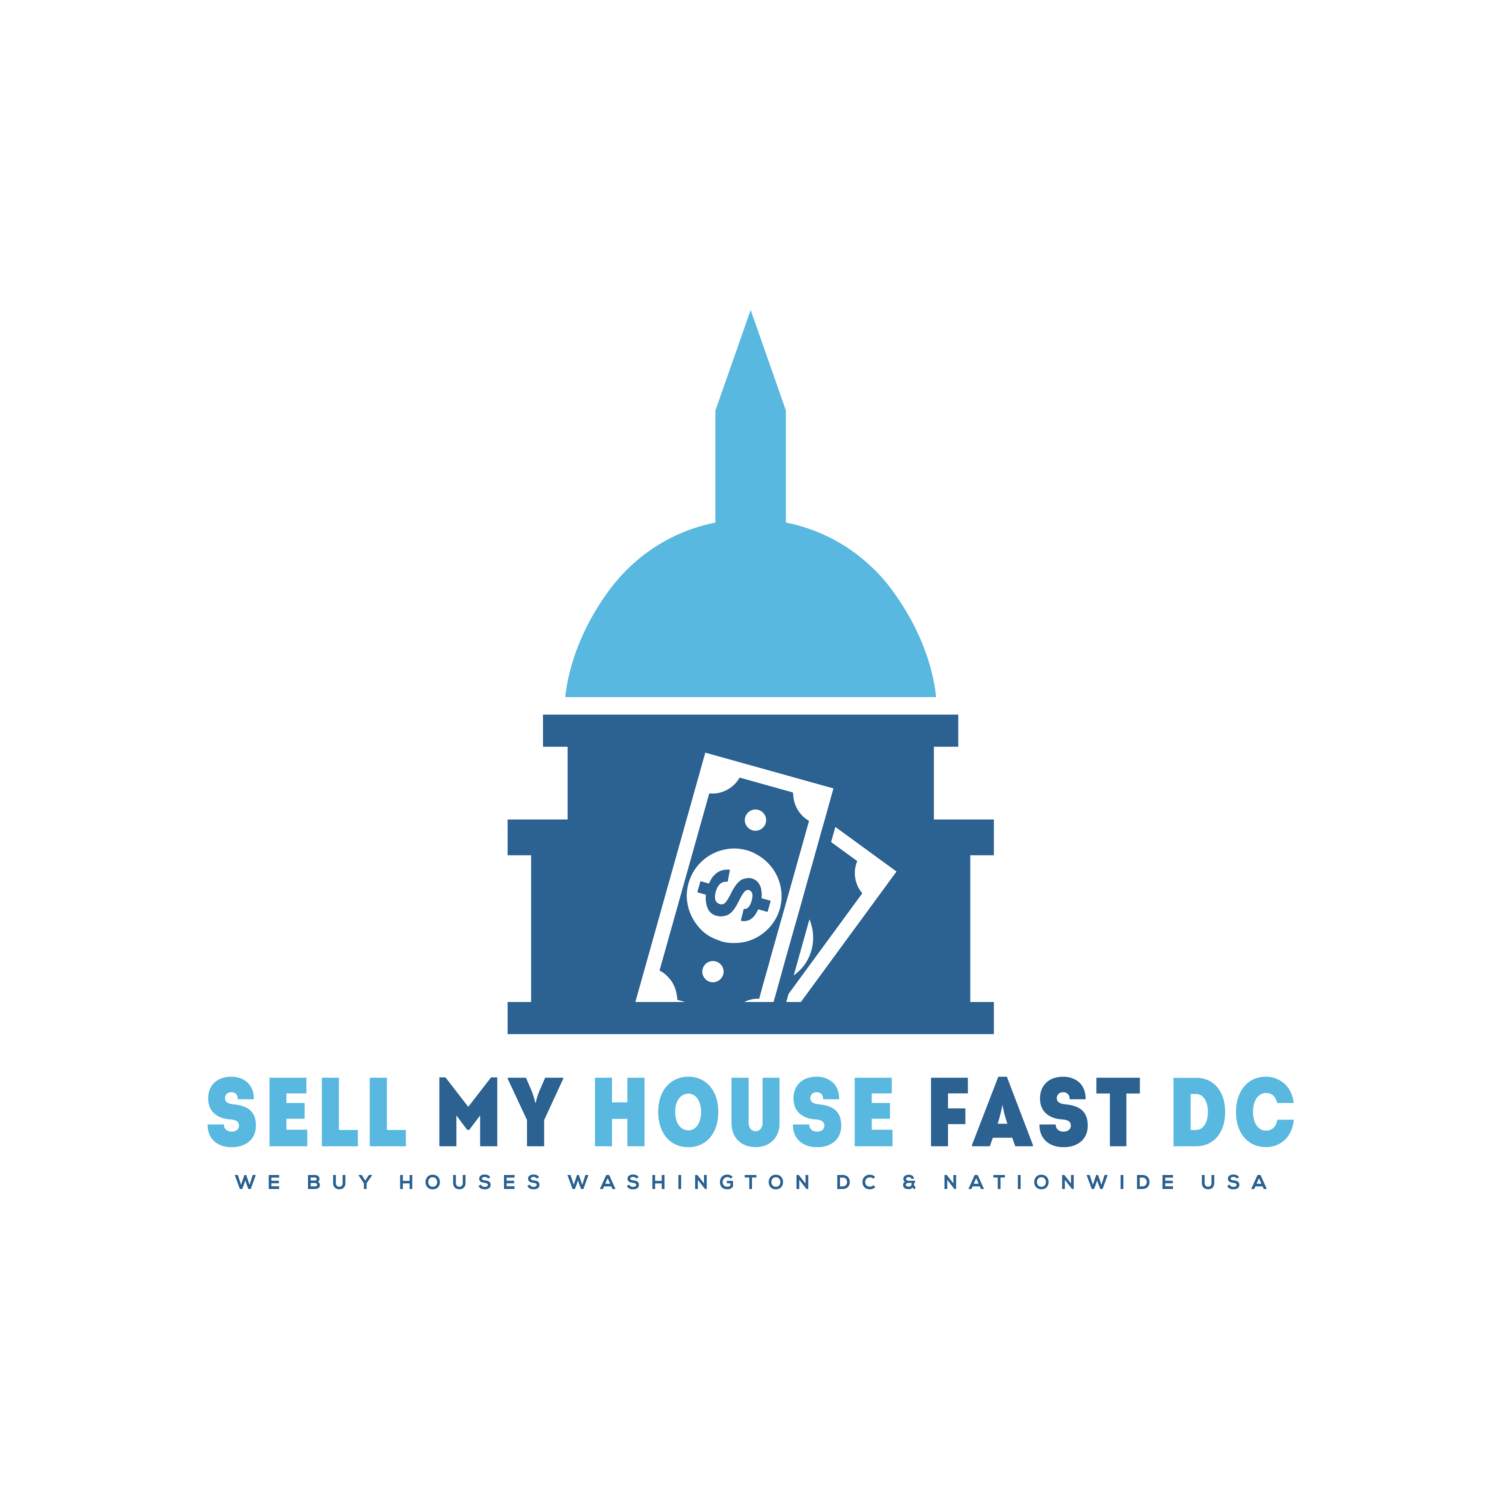 Sell My House Fast DC Maryland Virginia &amp; Nationwide USA | We Buy Houses DC MD VA | Cash for Houses Washington DC | We Buy Land | We Buy Houses Near Me